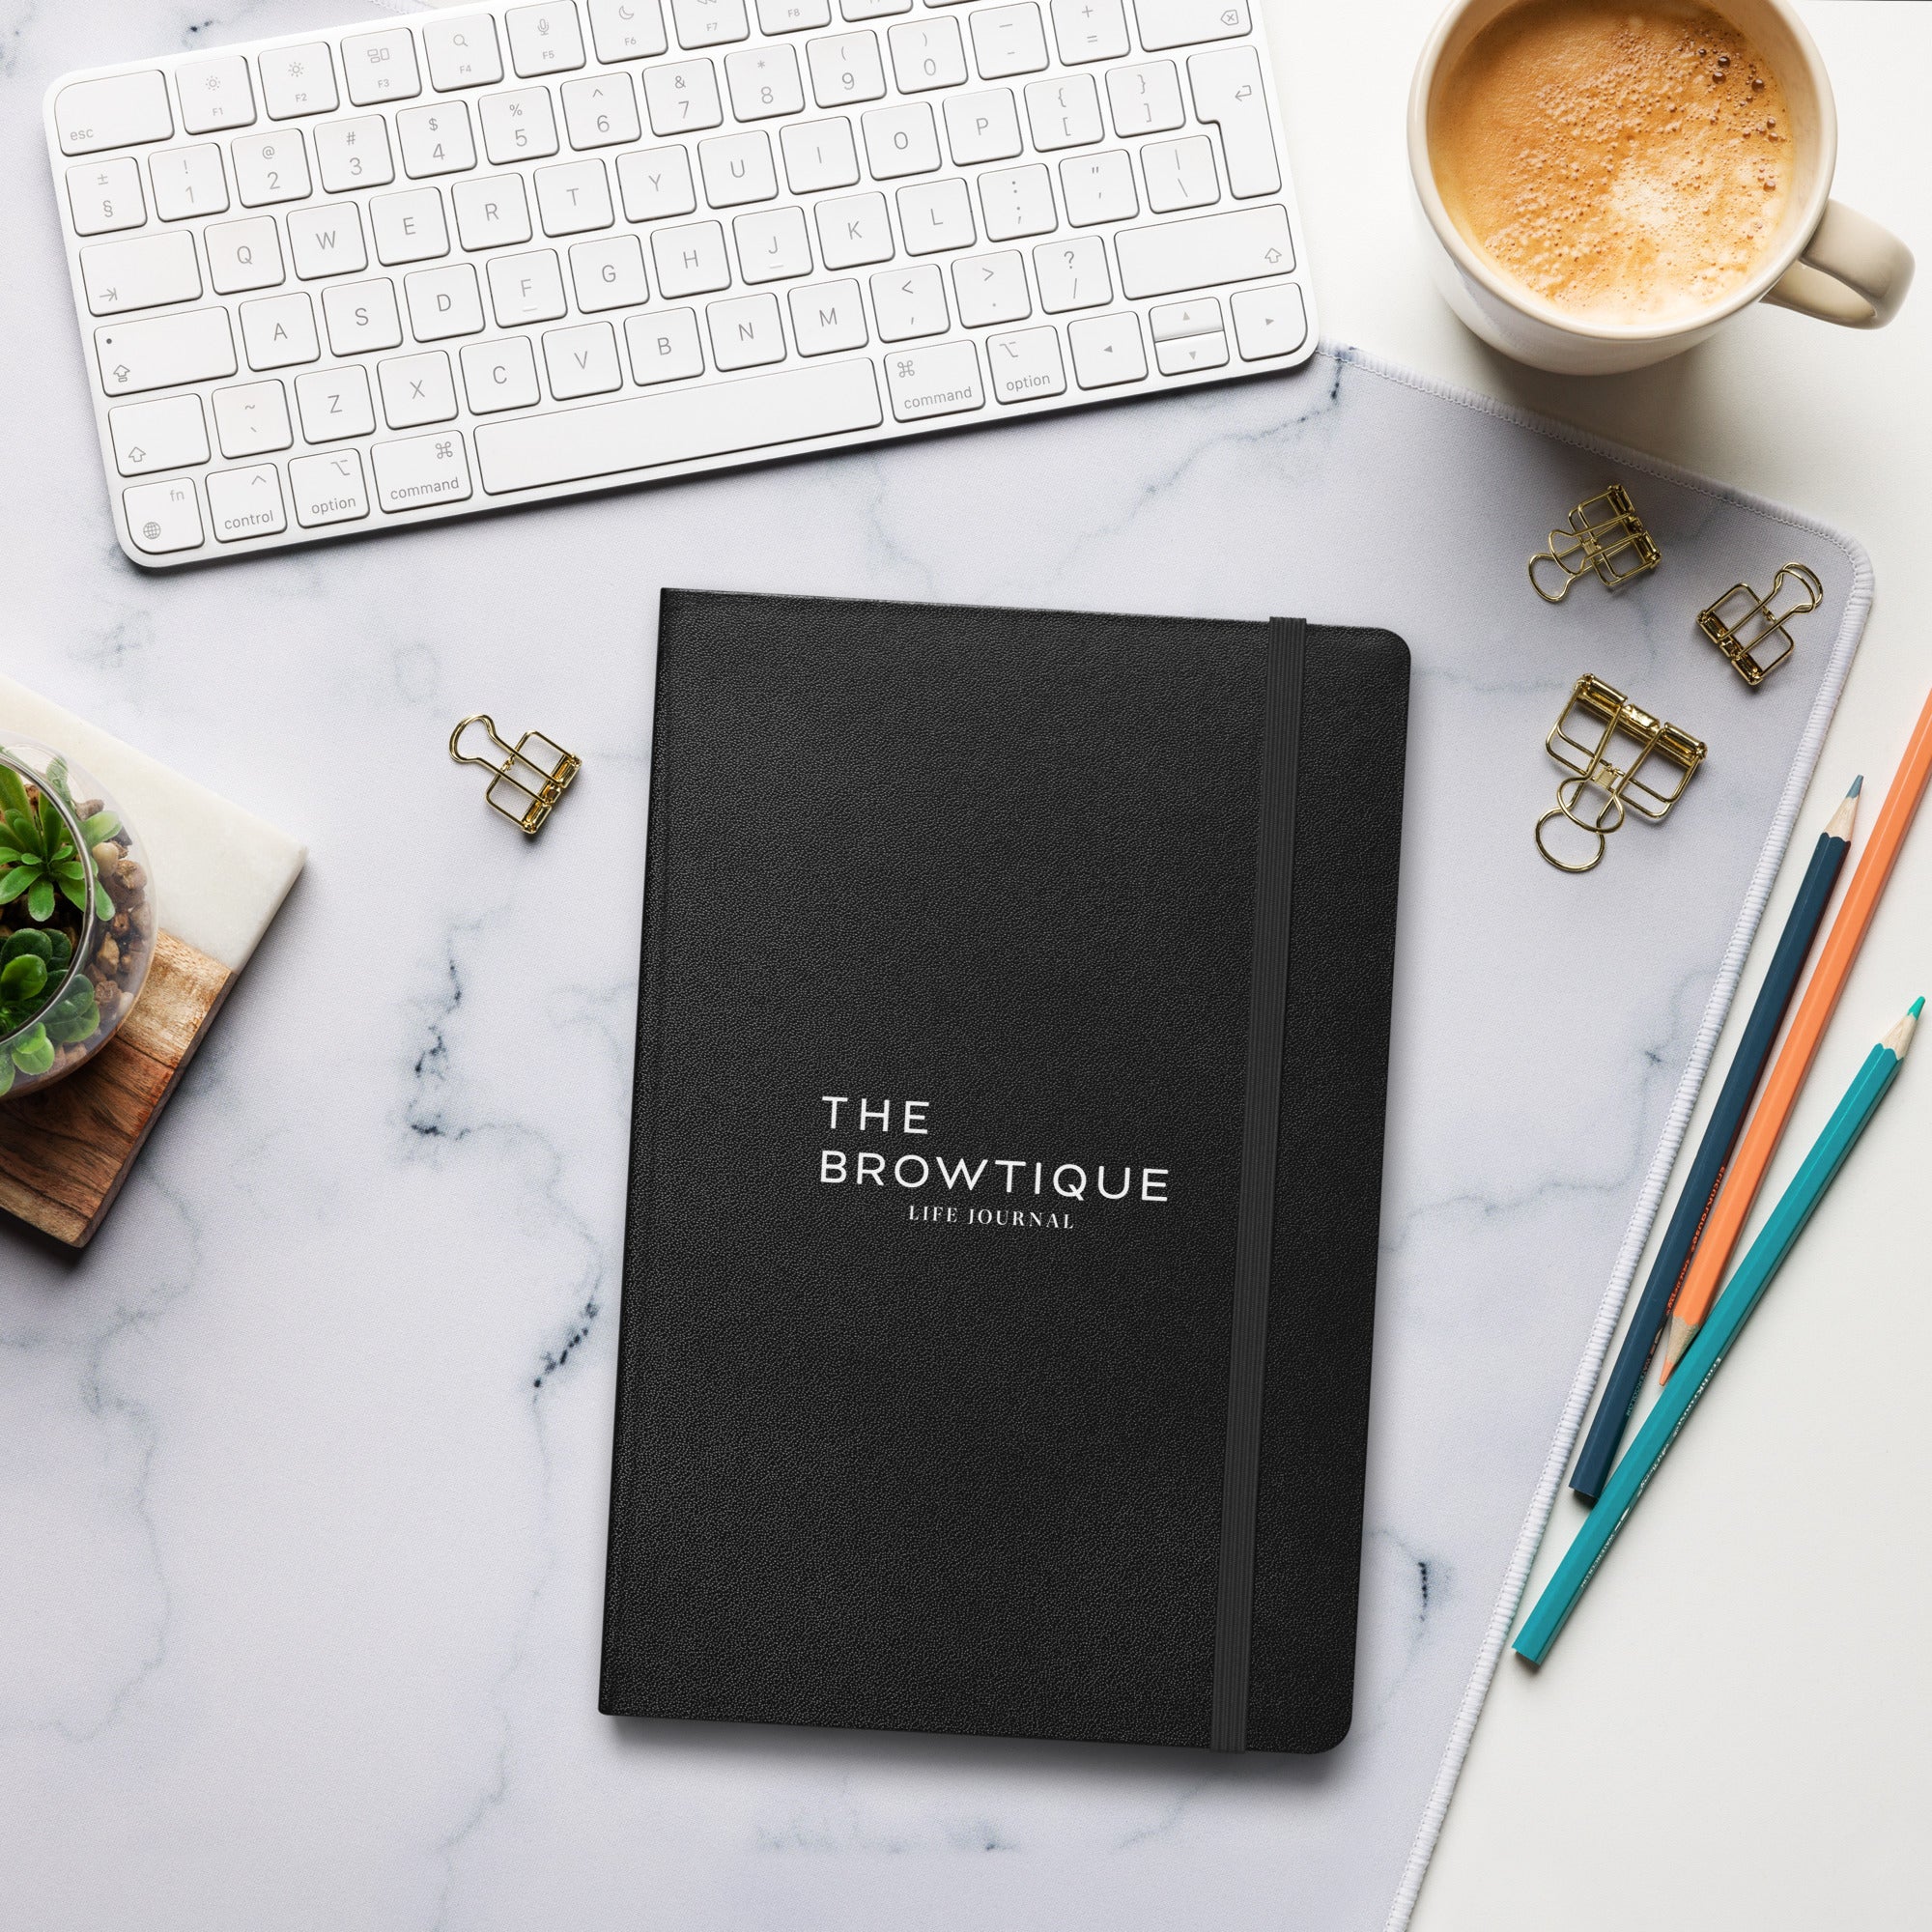 The Browtique Life Journal Hardcover notebook